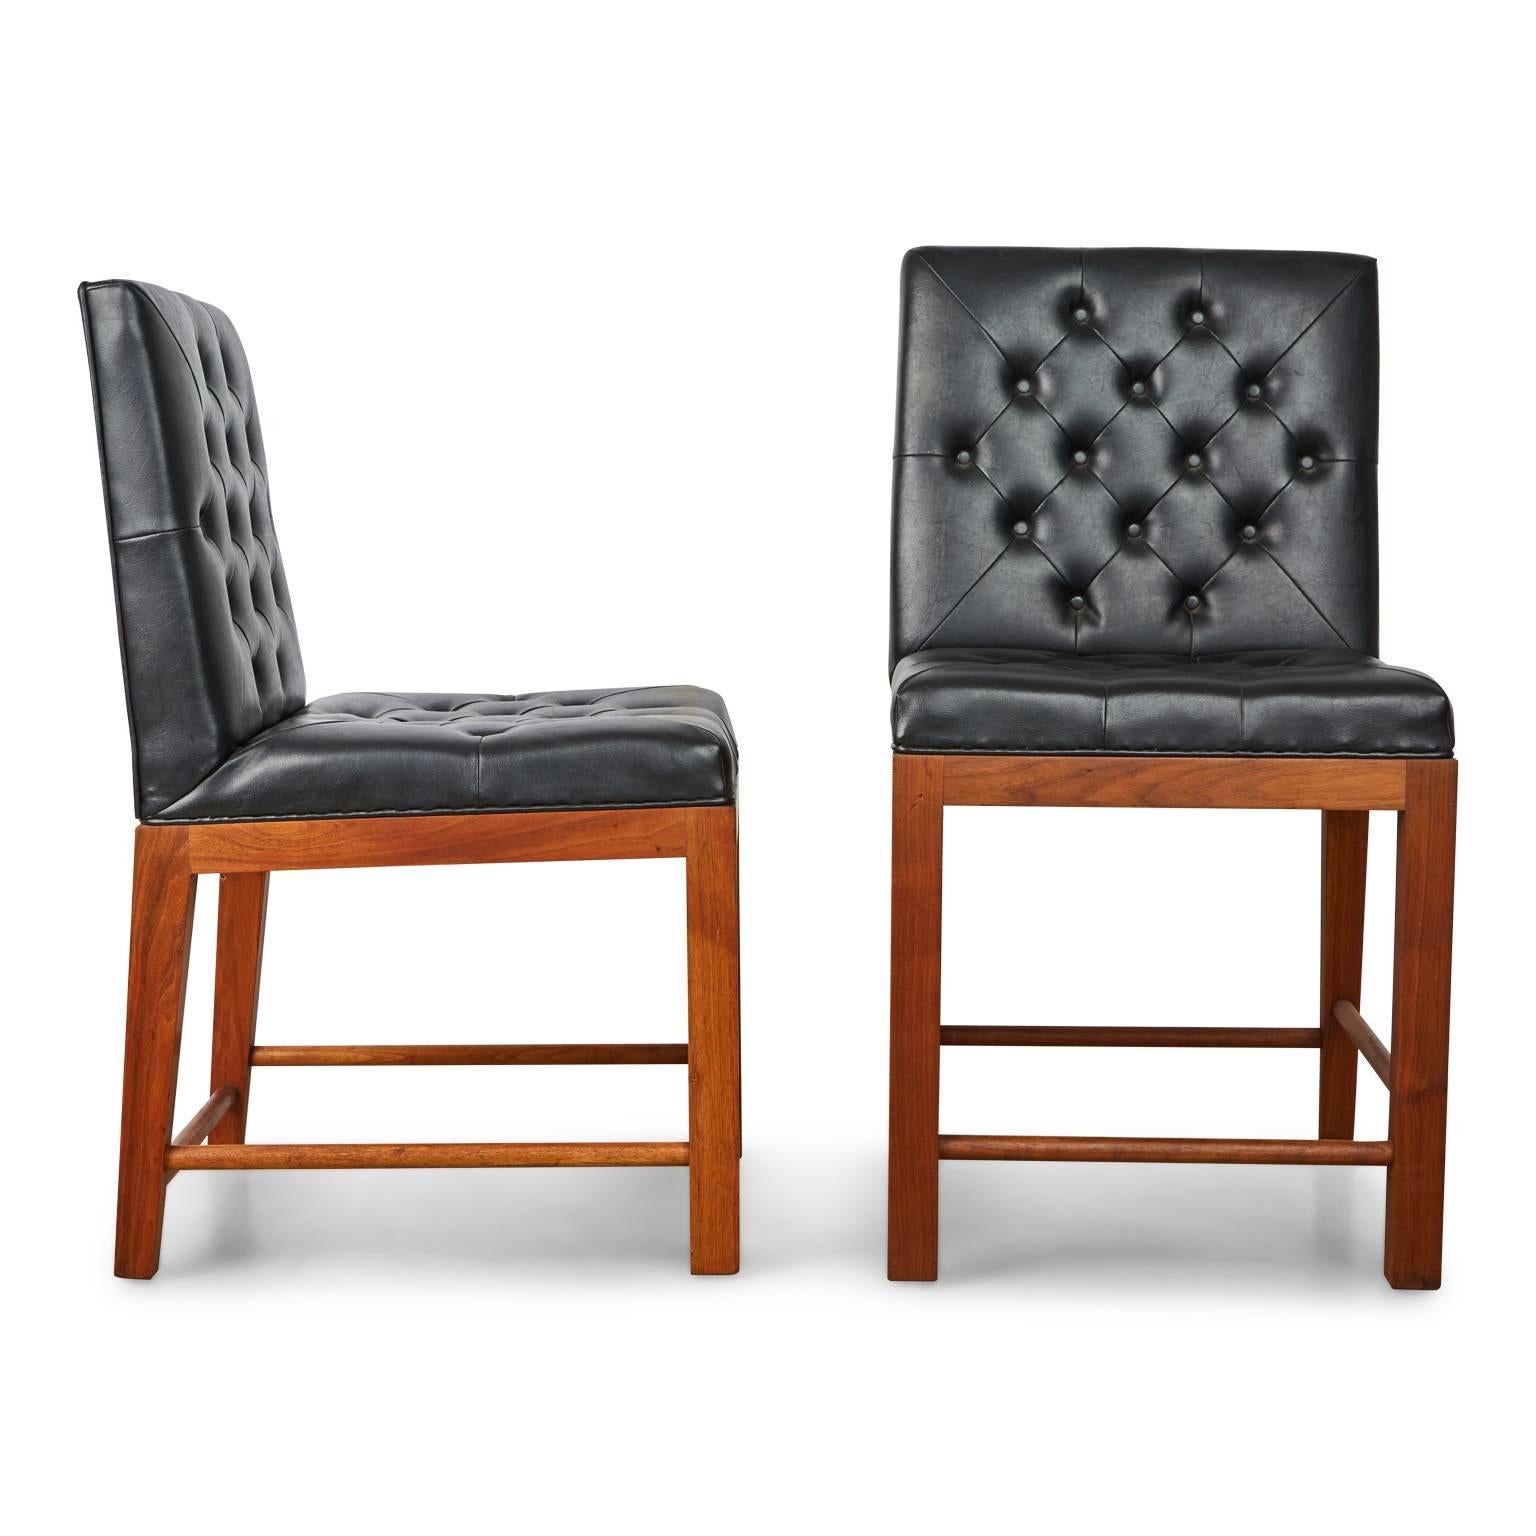 Aquire your own little piece of Californian history with this set of two high chairs, which were initially commissioned for the Dorothy Chandler Pavilion by Welton Becket and Associates for Prentice in 1965. Each chair has the original manufacturing